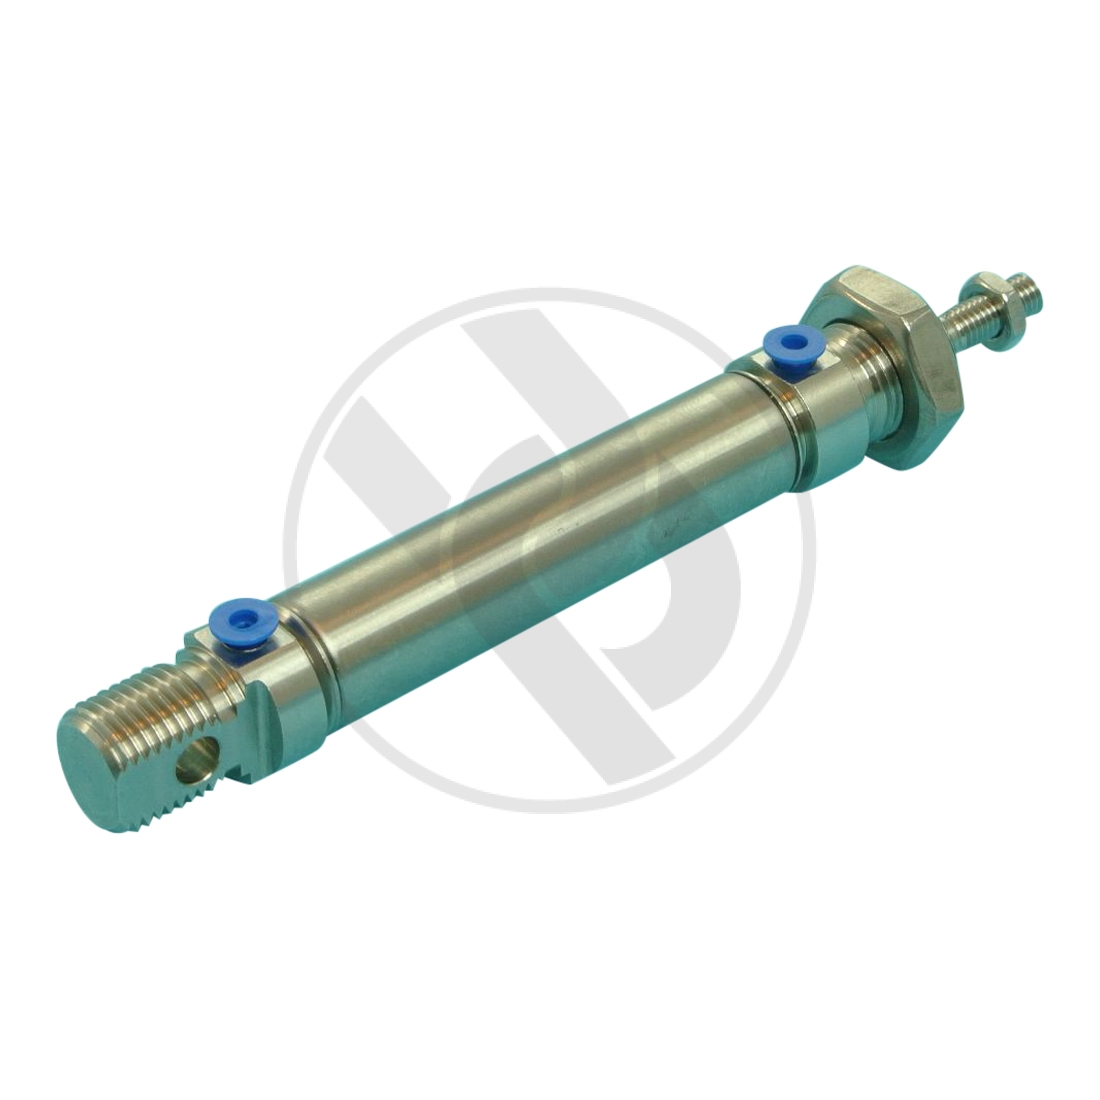 Cylinder 16×40, Stainless steel, for Multipond